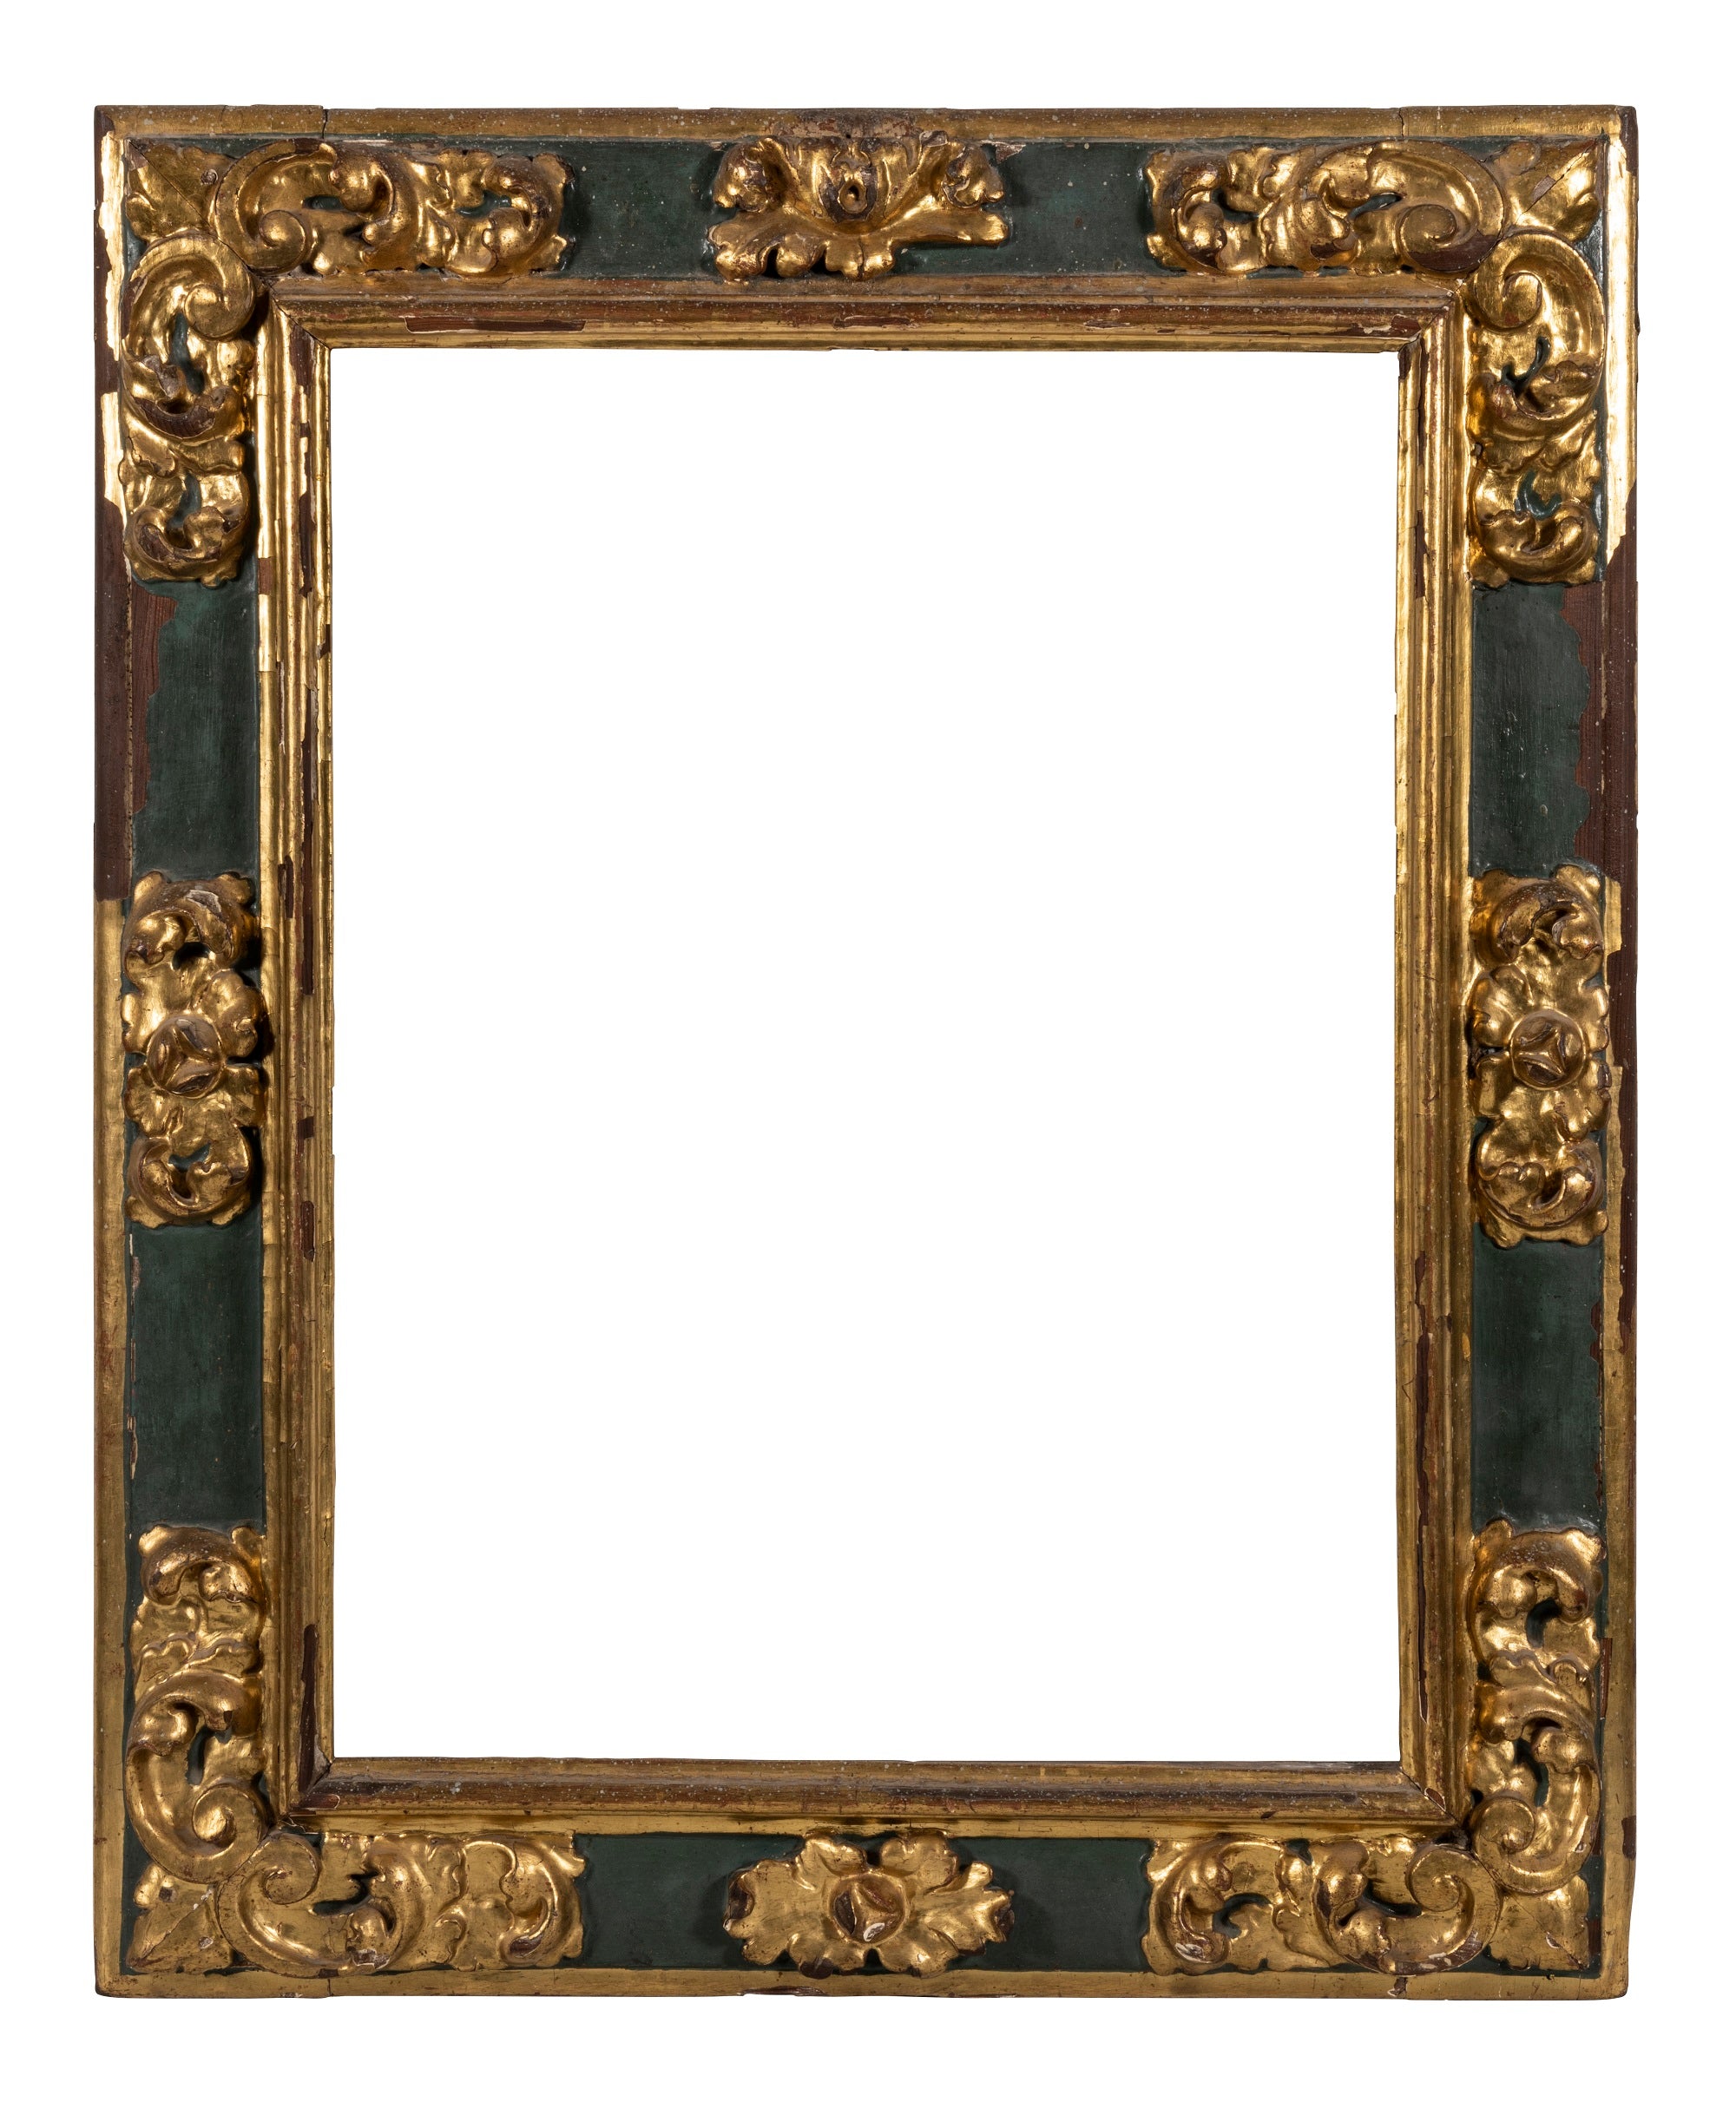 Late 17th-Early 18th Century Spanish Gilt and Polychrome Frame